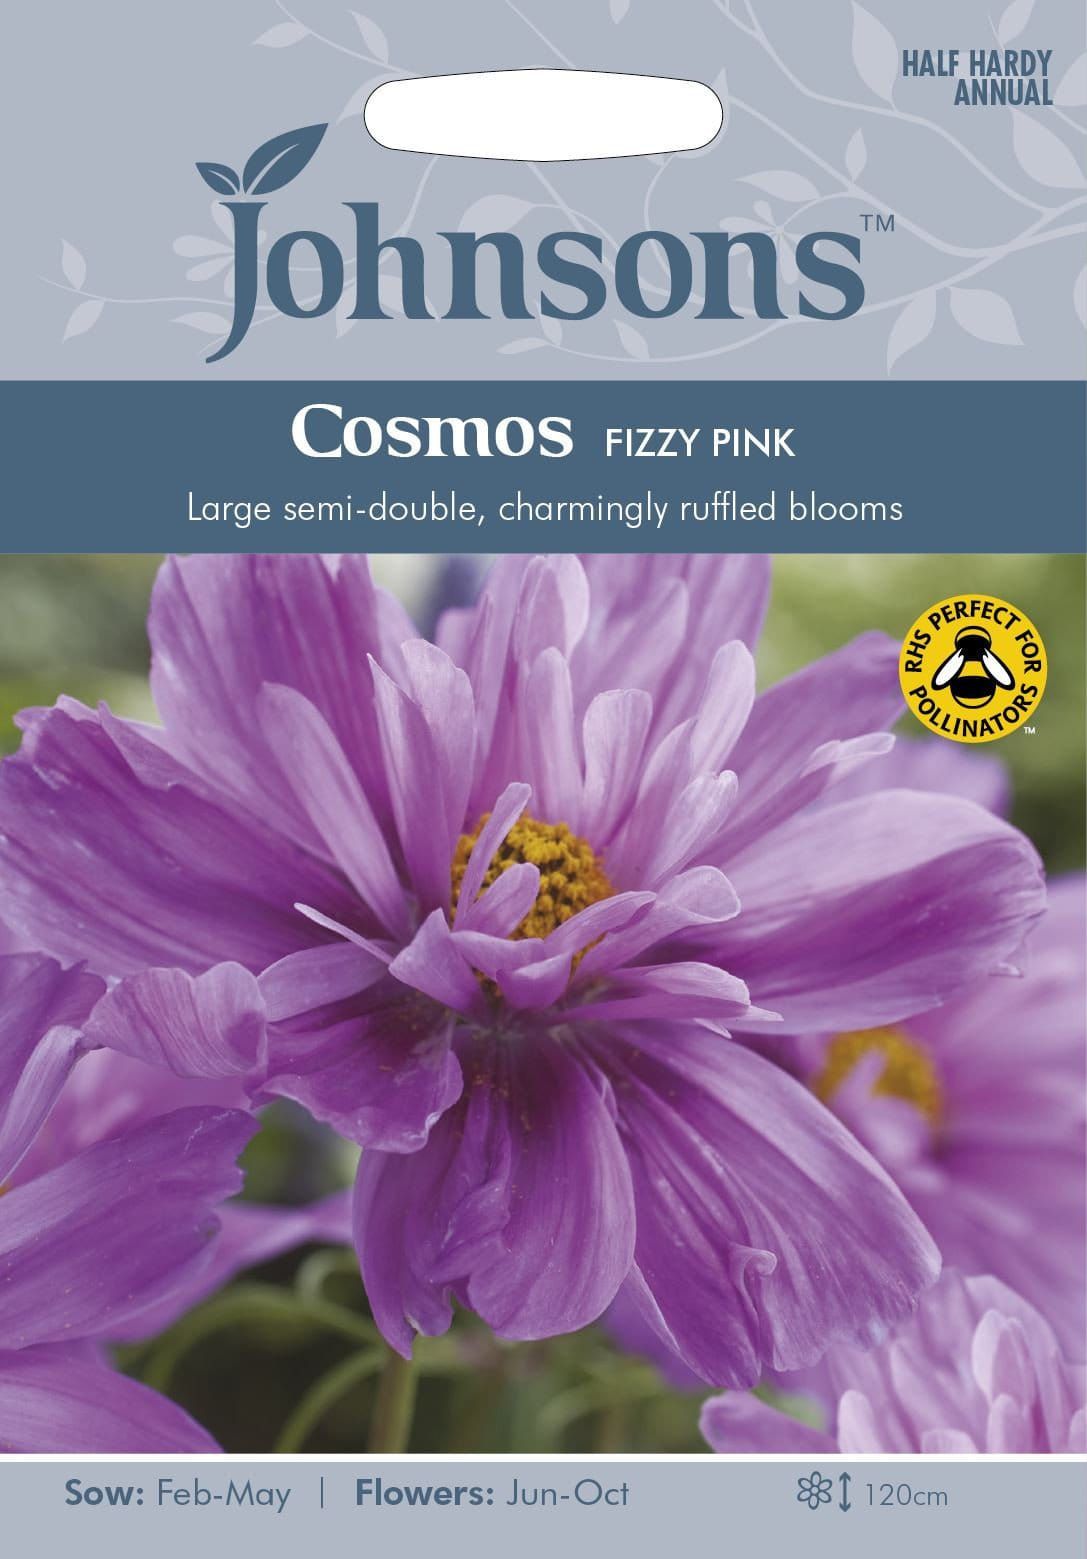 Johnsons Cosmos Fizzy pink 30 Seeds